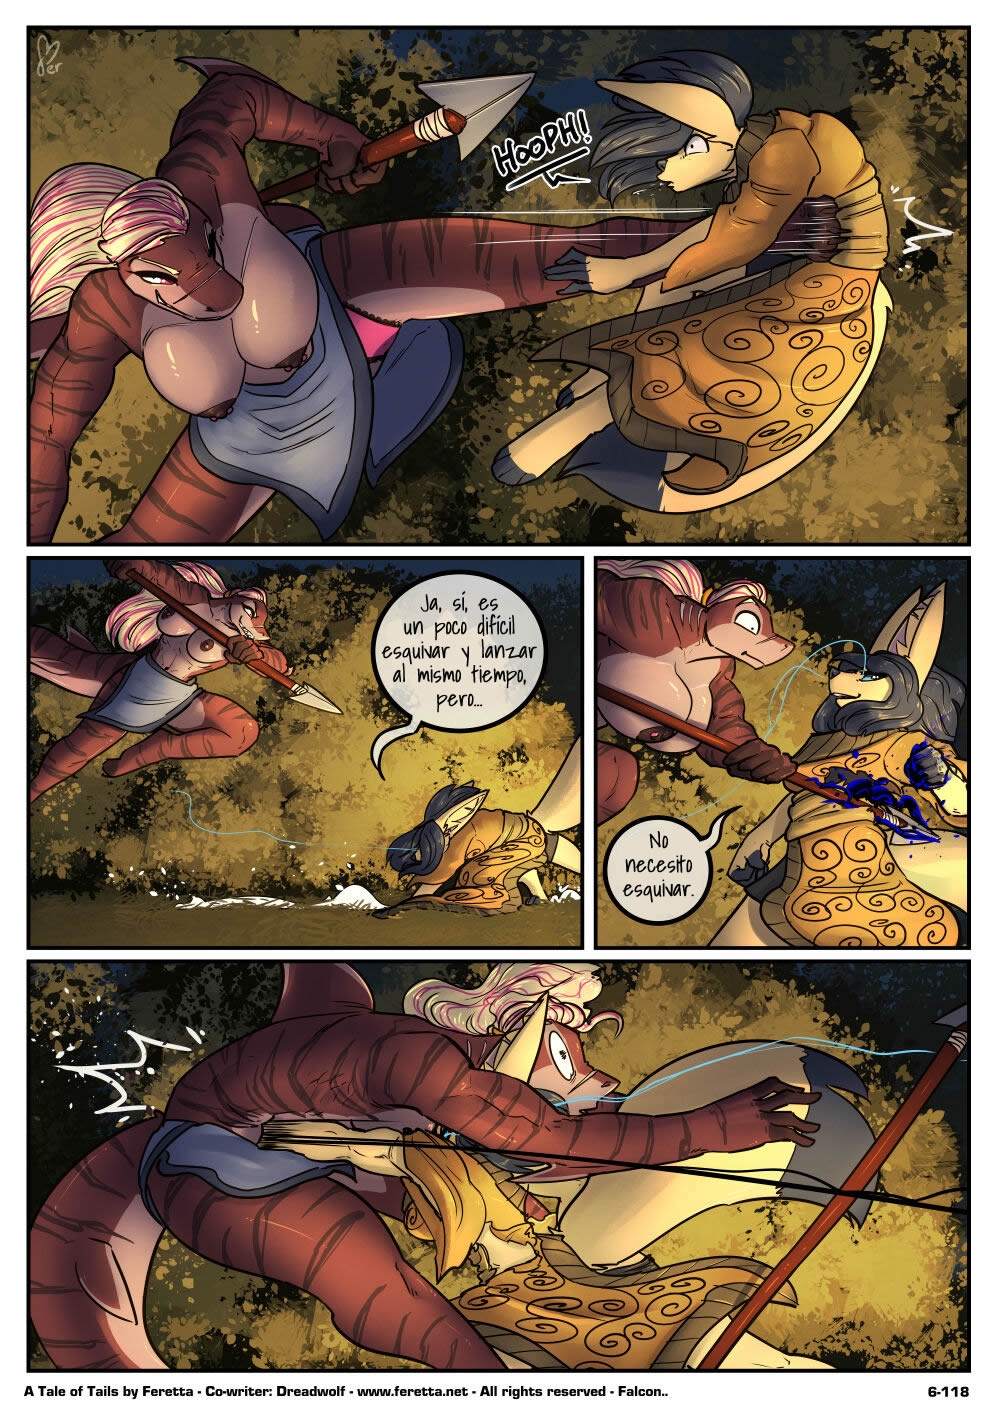 [Feretta] A Tale of Tails: Chapter 6 - Paths converge / Los caminos convergen [Spanish] [Red Fox Makkan] 118